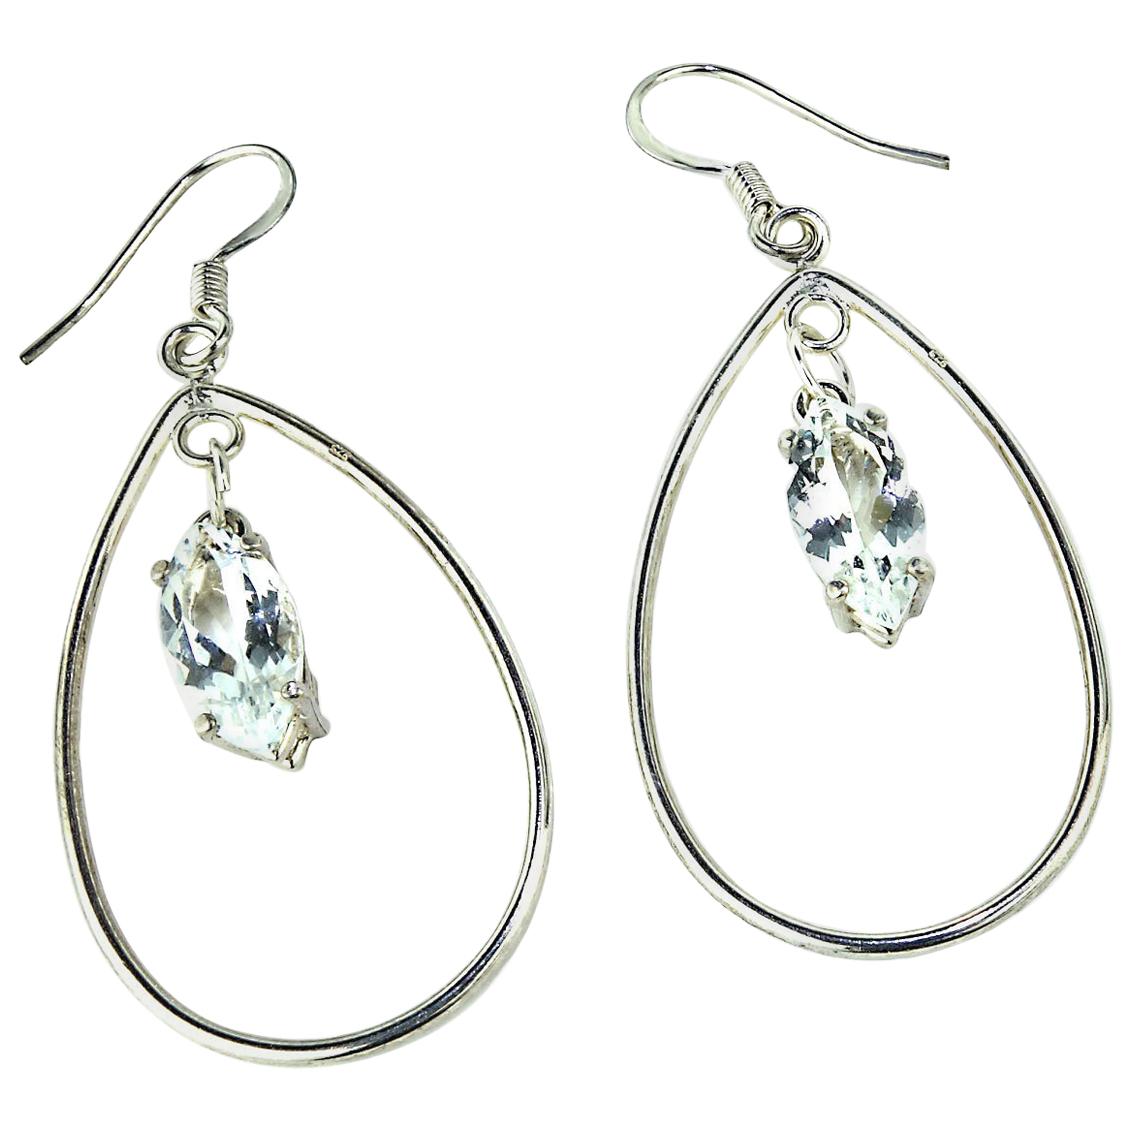 Earrings of Sterling Silver Teardrop hoops with a transparent marquise shaped Sri Lankan spinel dangling in the middle. These earrings have lots of swing and movement and the transparent spinel flash and sparkle. The earrings have silver plate